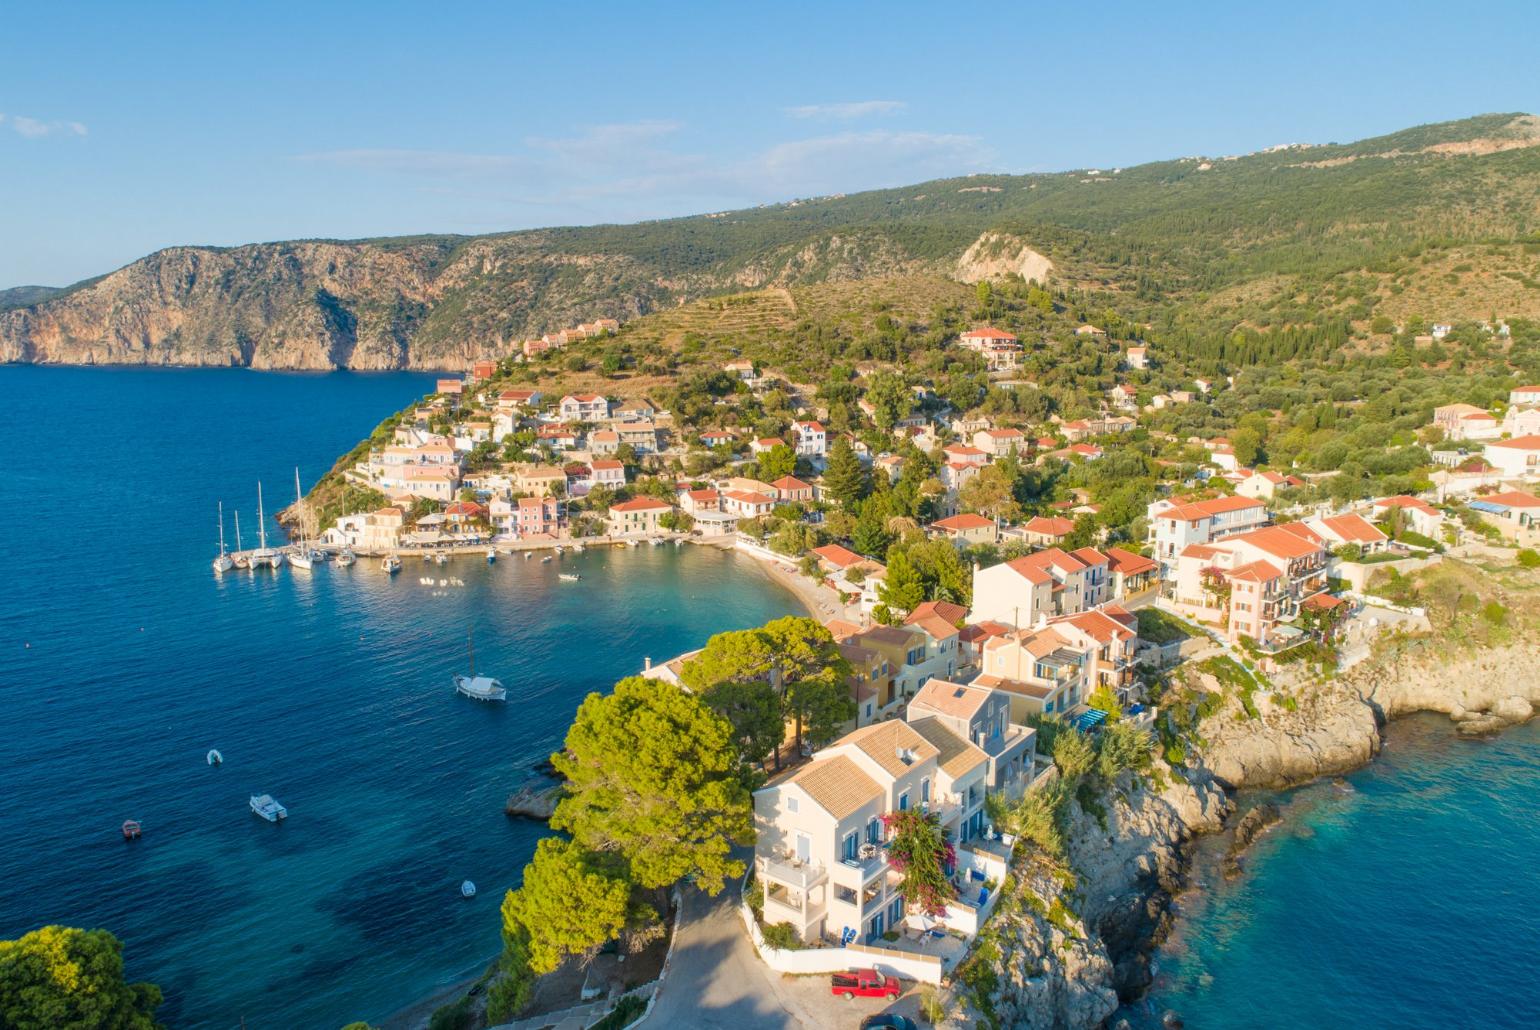 The colourful seaside town of Assos